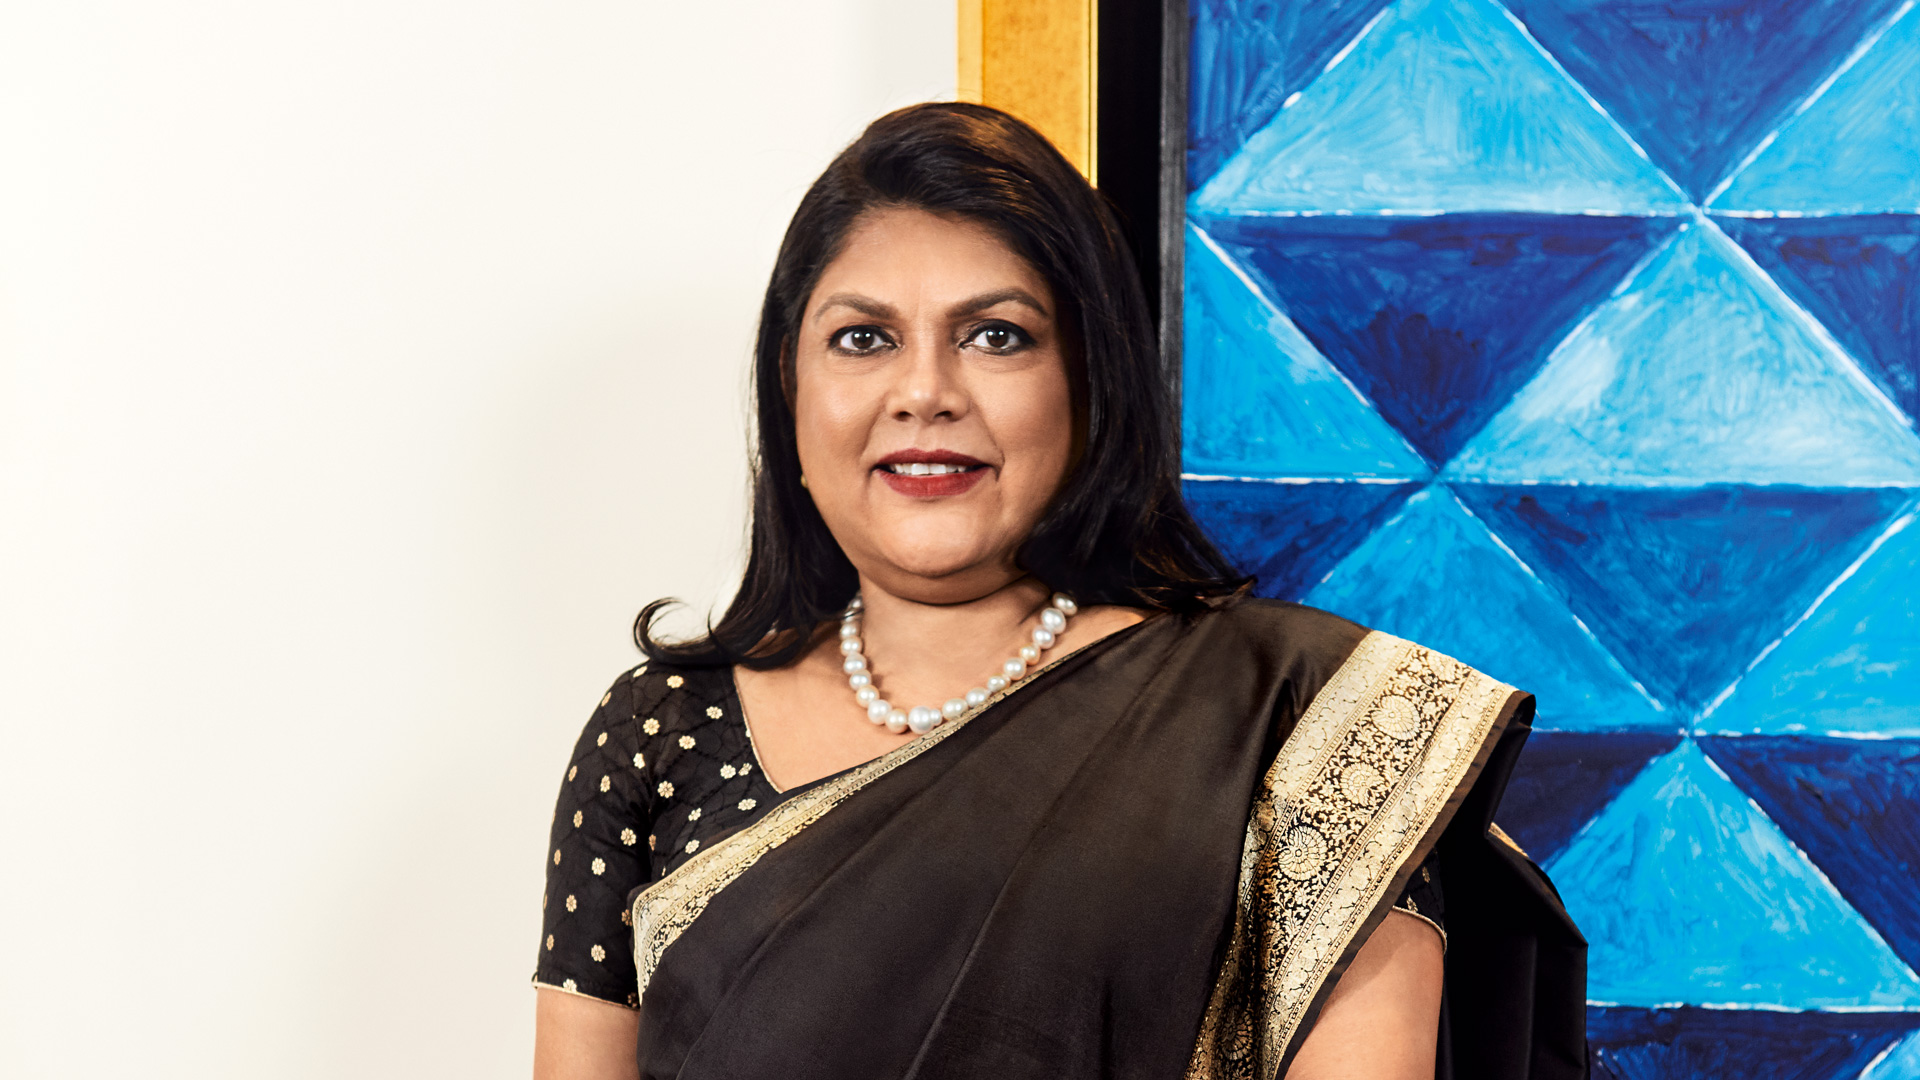 Nykaa founder Falguni Nayyar: "Have 4 to 5 priorities in life and let work  be reasonably high"